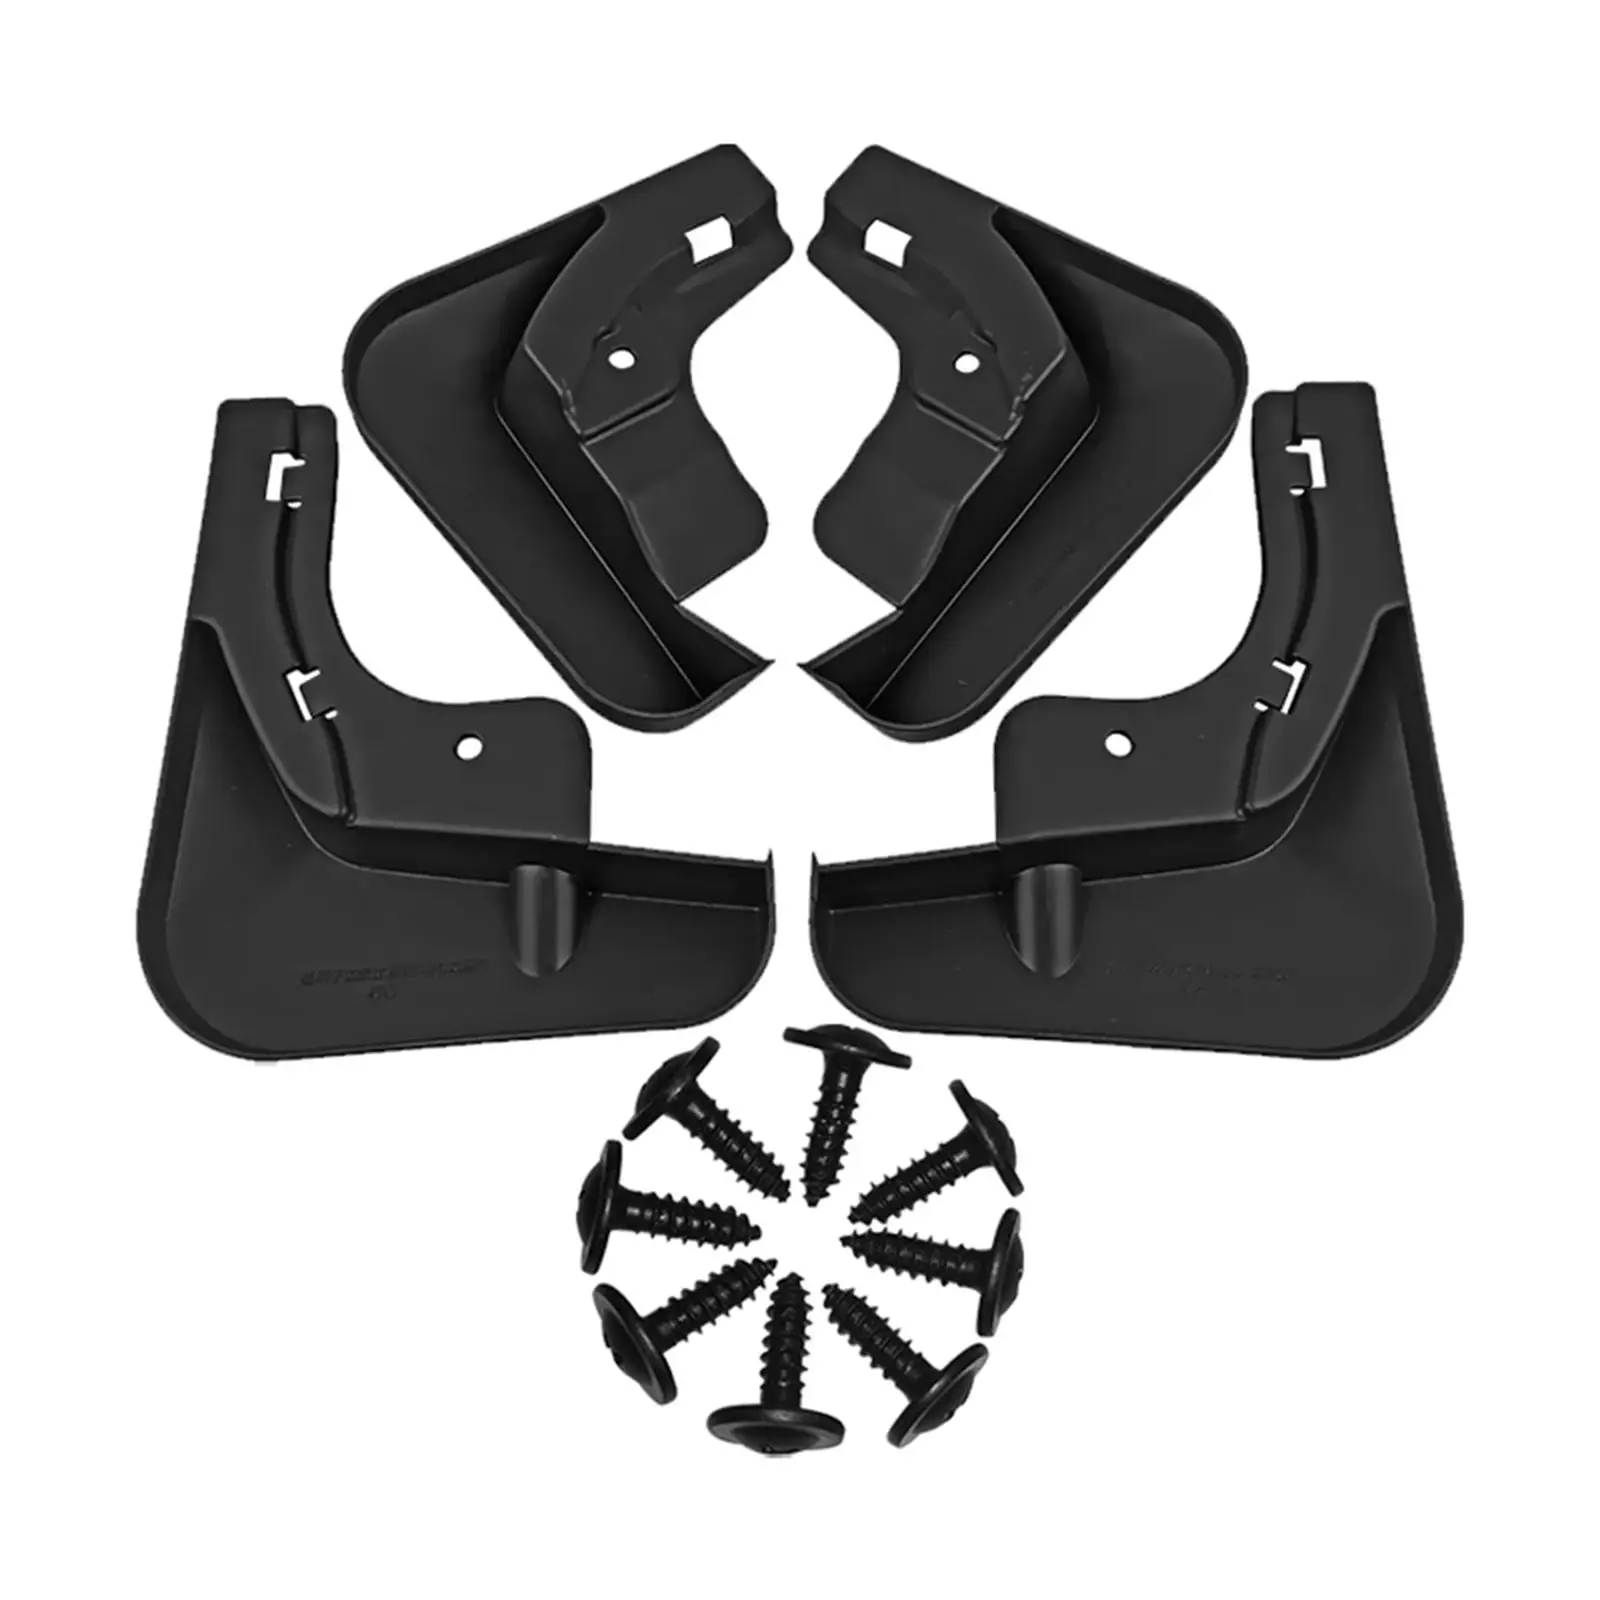 4 Pieces Mudguard Replaces Thicken Professional Splash Guards for Auto Tyre